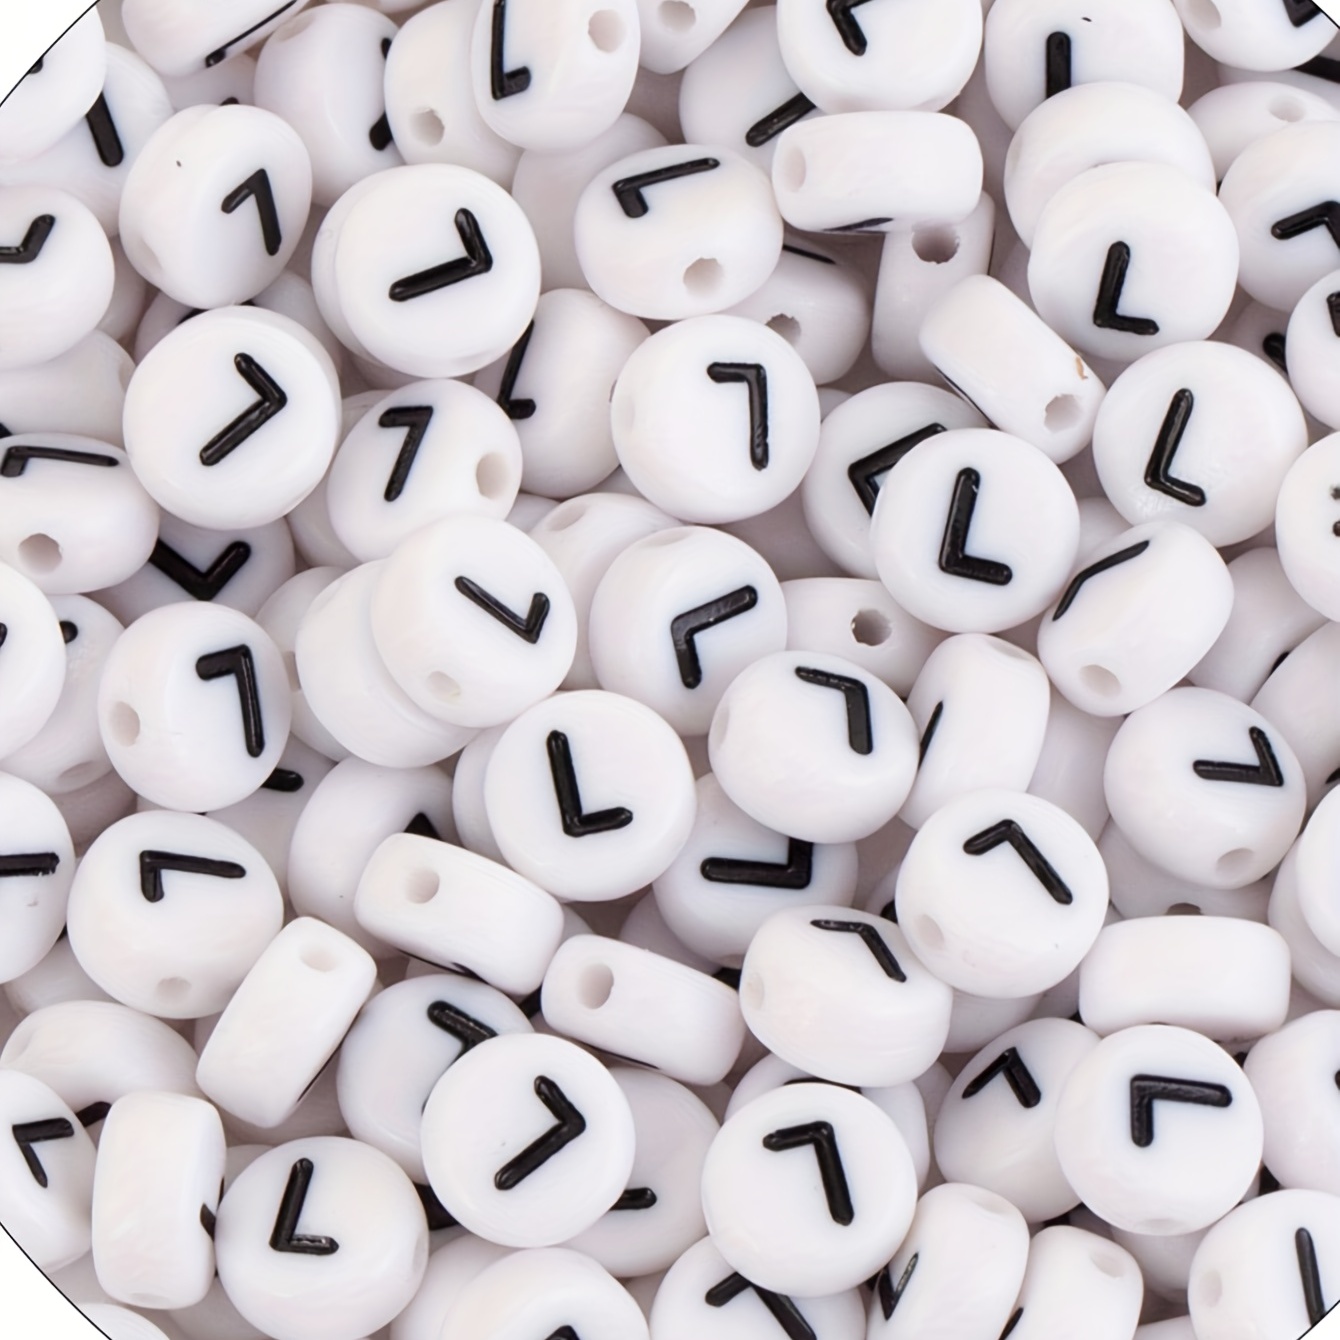 500PCS Acrylic Small White Letter Beads for Jewelry India